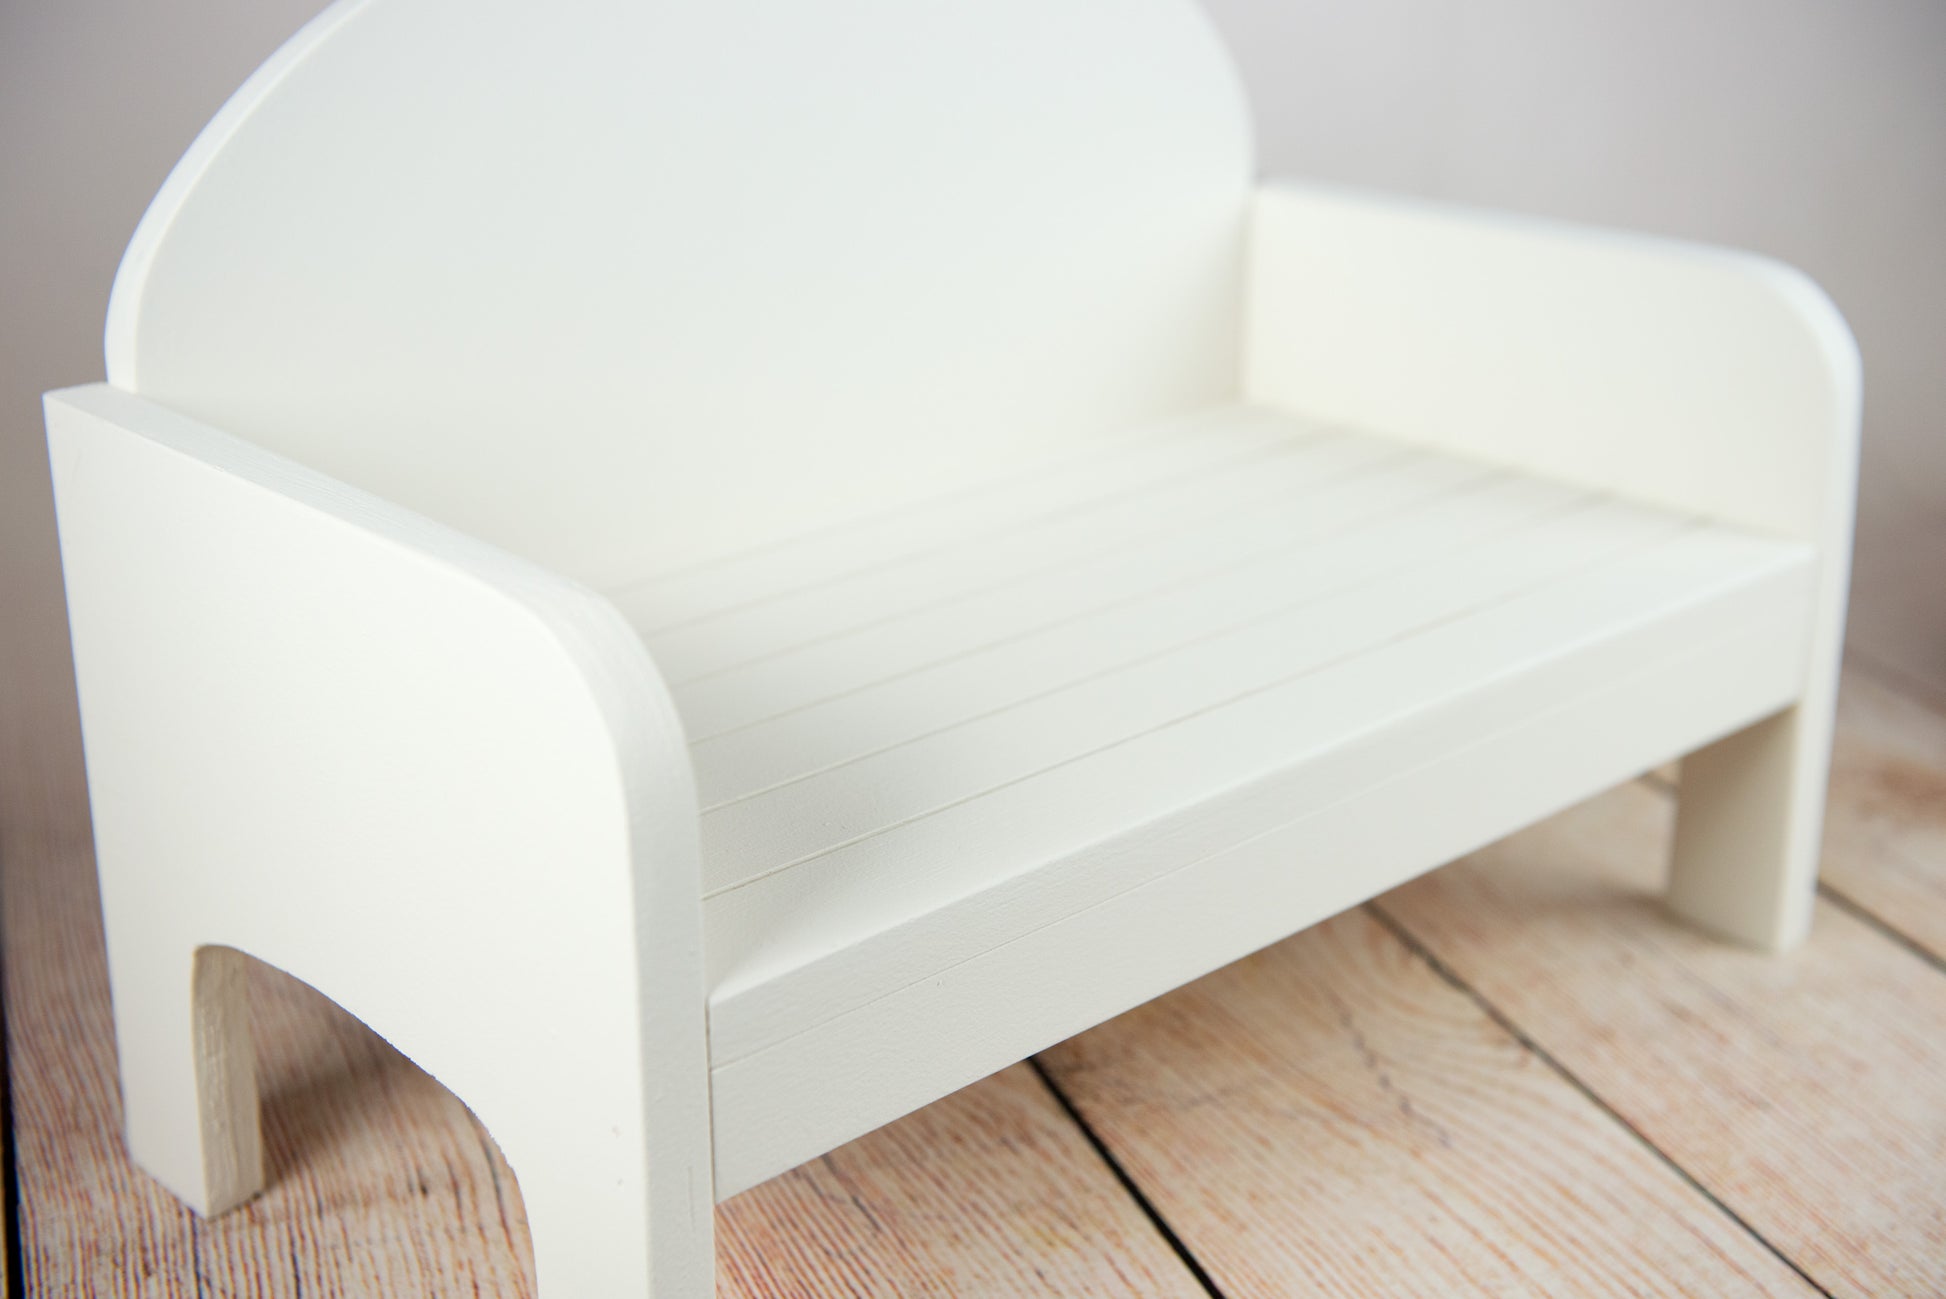 Handmade white rustic wooden bench for newborn photography, cozy curve design, ideal for newborn and baby photographers